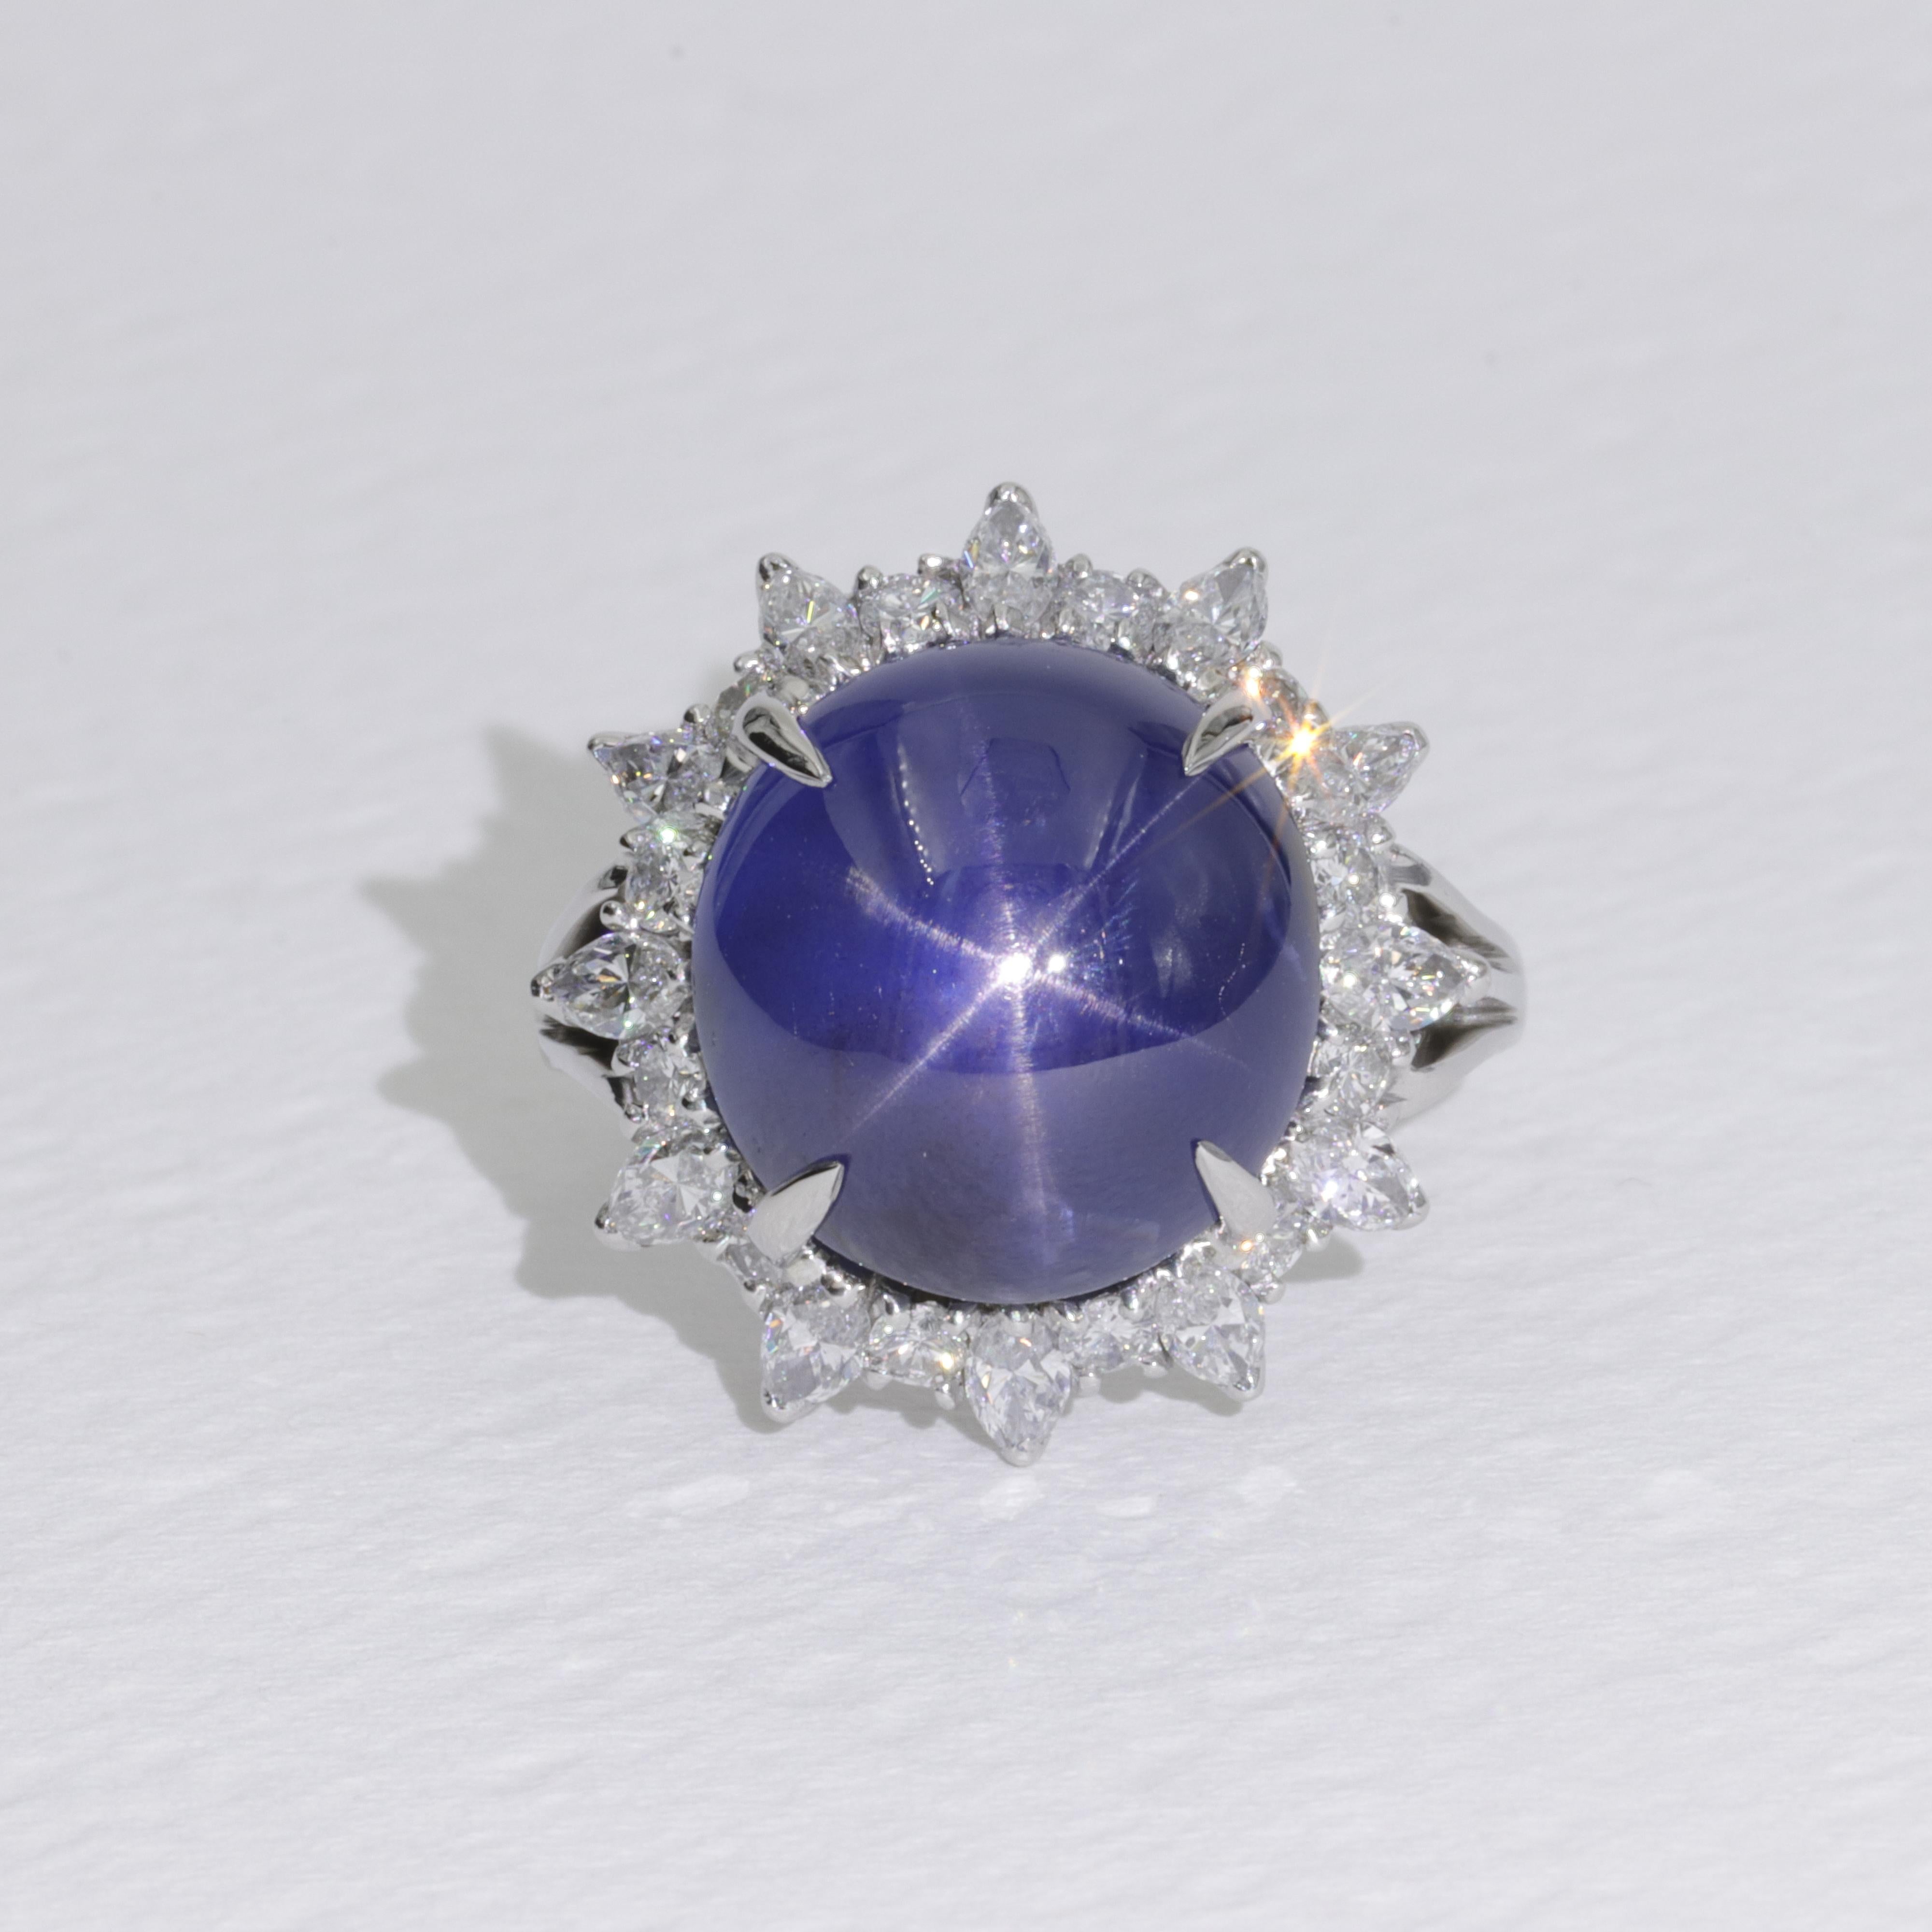 A.G.L. 21.74ct Burma No Heat Star Sapphire in Platinum Ring by Shreve, Crump and Low, one of Americas Oldest Jewelers Founded in 1796

Sapphire 
   Weight - 21.74ct
   Shape - Cabochon
   Color - Royal Blue 
   Treatment - No treatments 
   Origin -